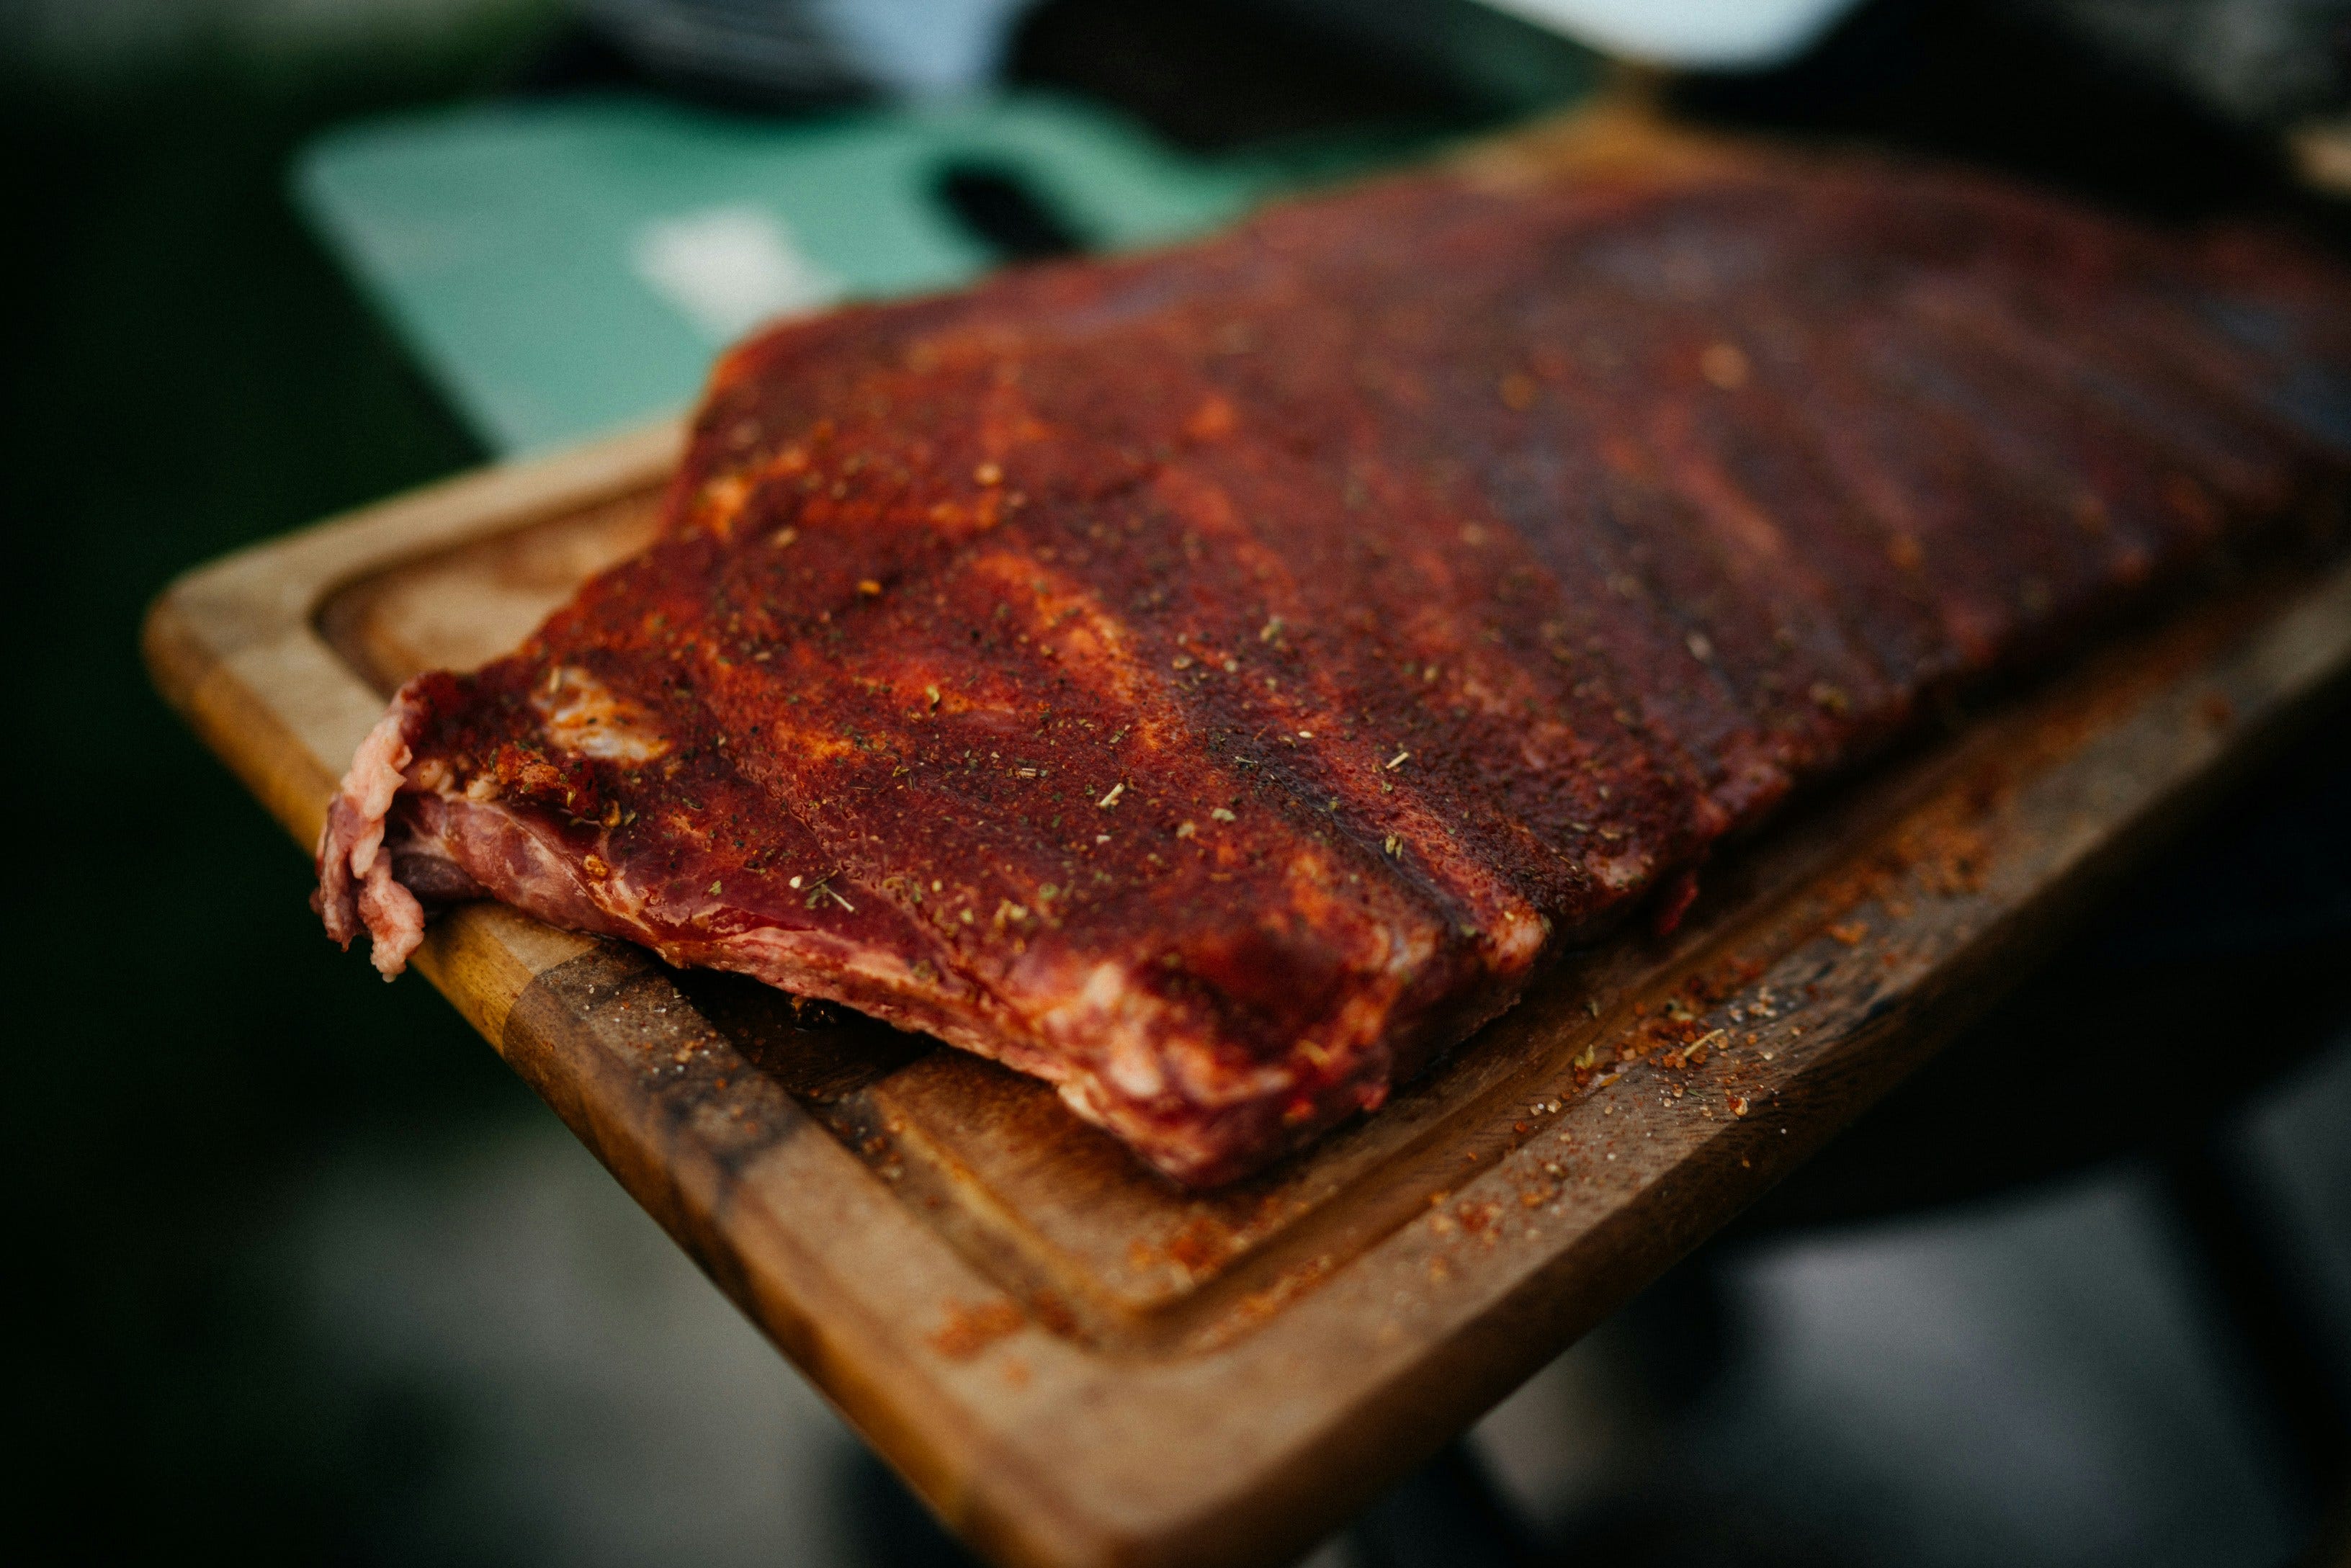 A close-up color photo showing a full rack of pork ribs sitting on a cutting board, dark red in color from rubbed on spices and sauce.